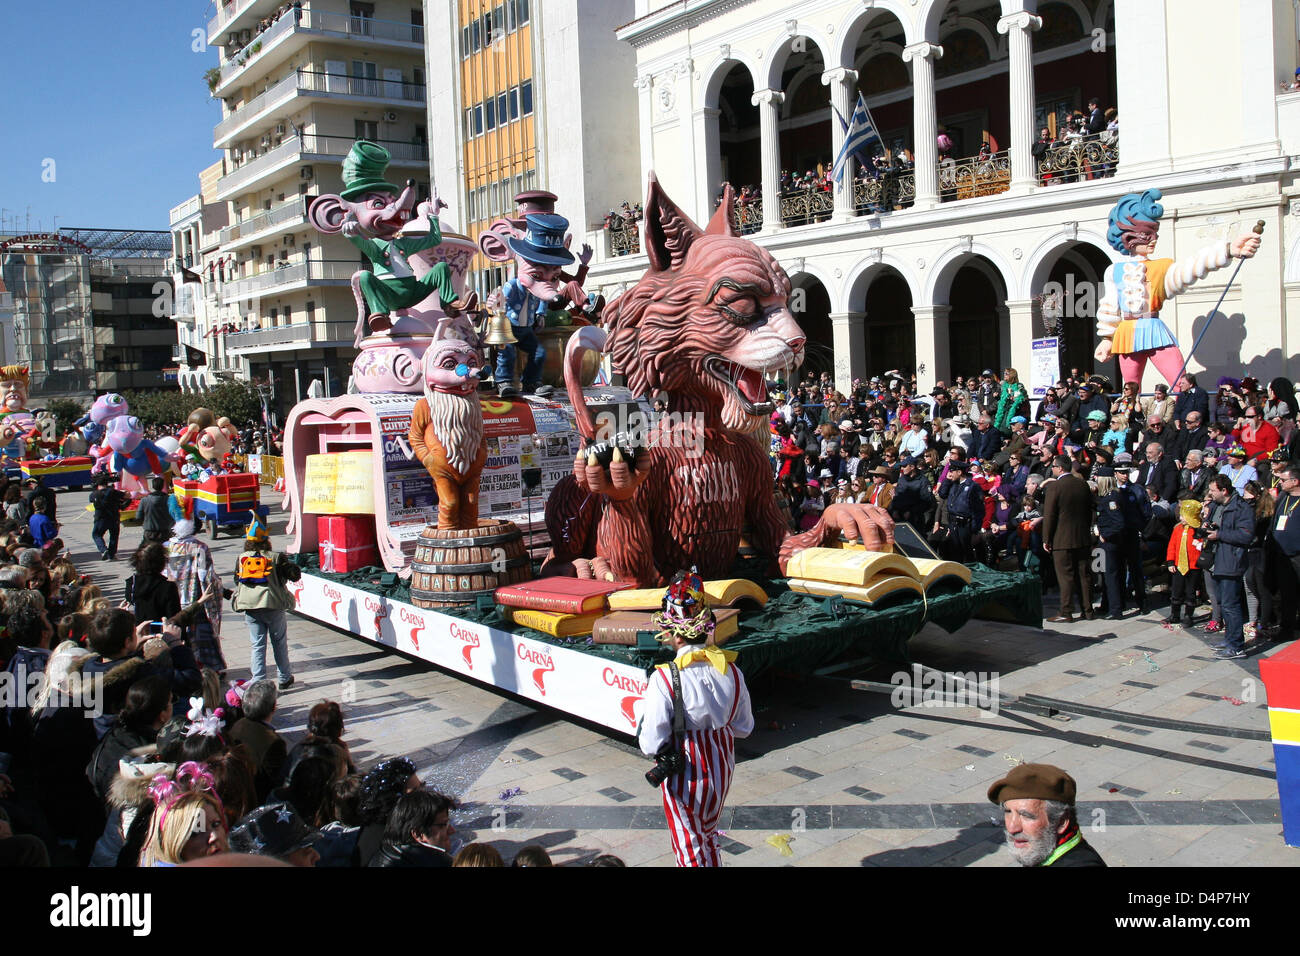 The cat carnival float at the Carnival in Patras Greece, 17 March 2013. Three mice hang a bell at the cat's tail. The mice reflect the greek government, in aristocratic appearance, has all the features of the political system. The cat, representing troika, in one hand holds three bombs which reads 'explosive economic growth' while reading the memorandums. The Patras Carnival is the largest event of its kind in Greece and one of the biggest in Europe, with more than 160 years of history. Photo: Menelaos Michalatos Stock Photo